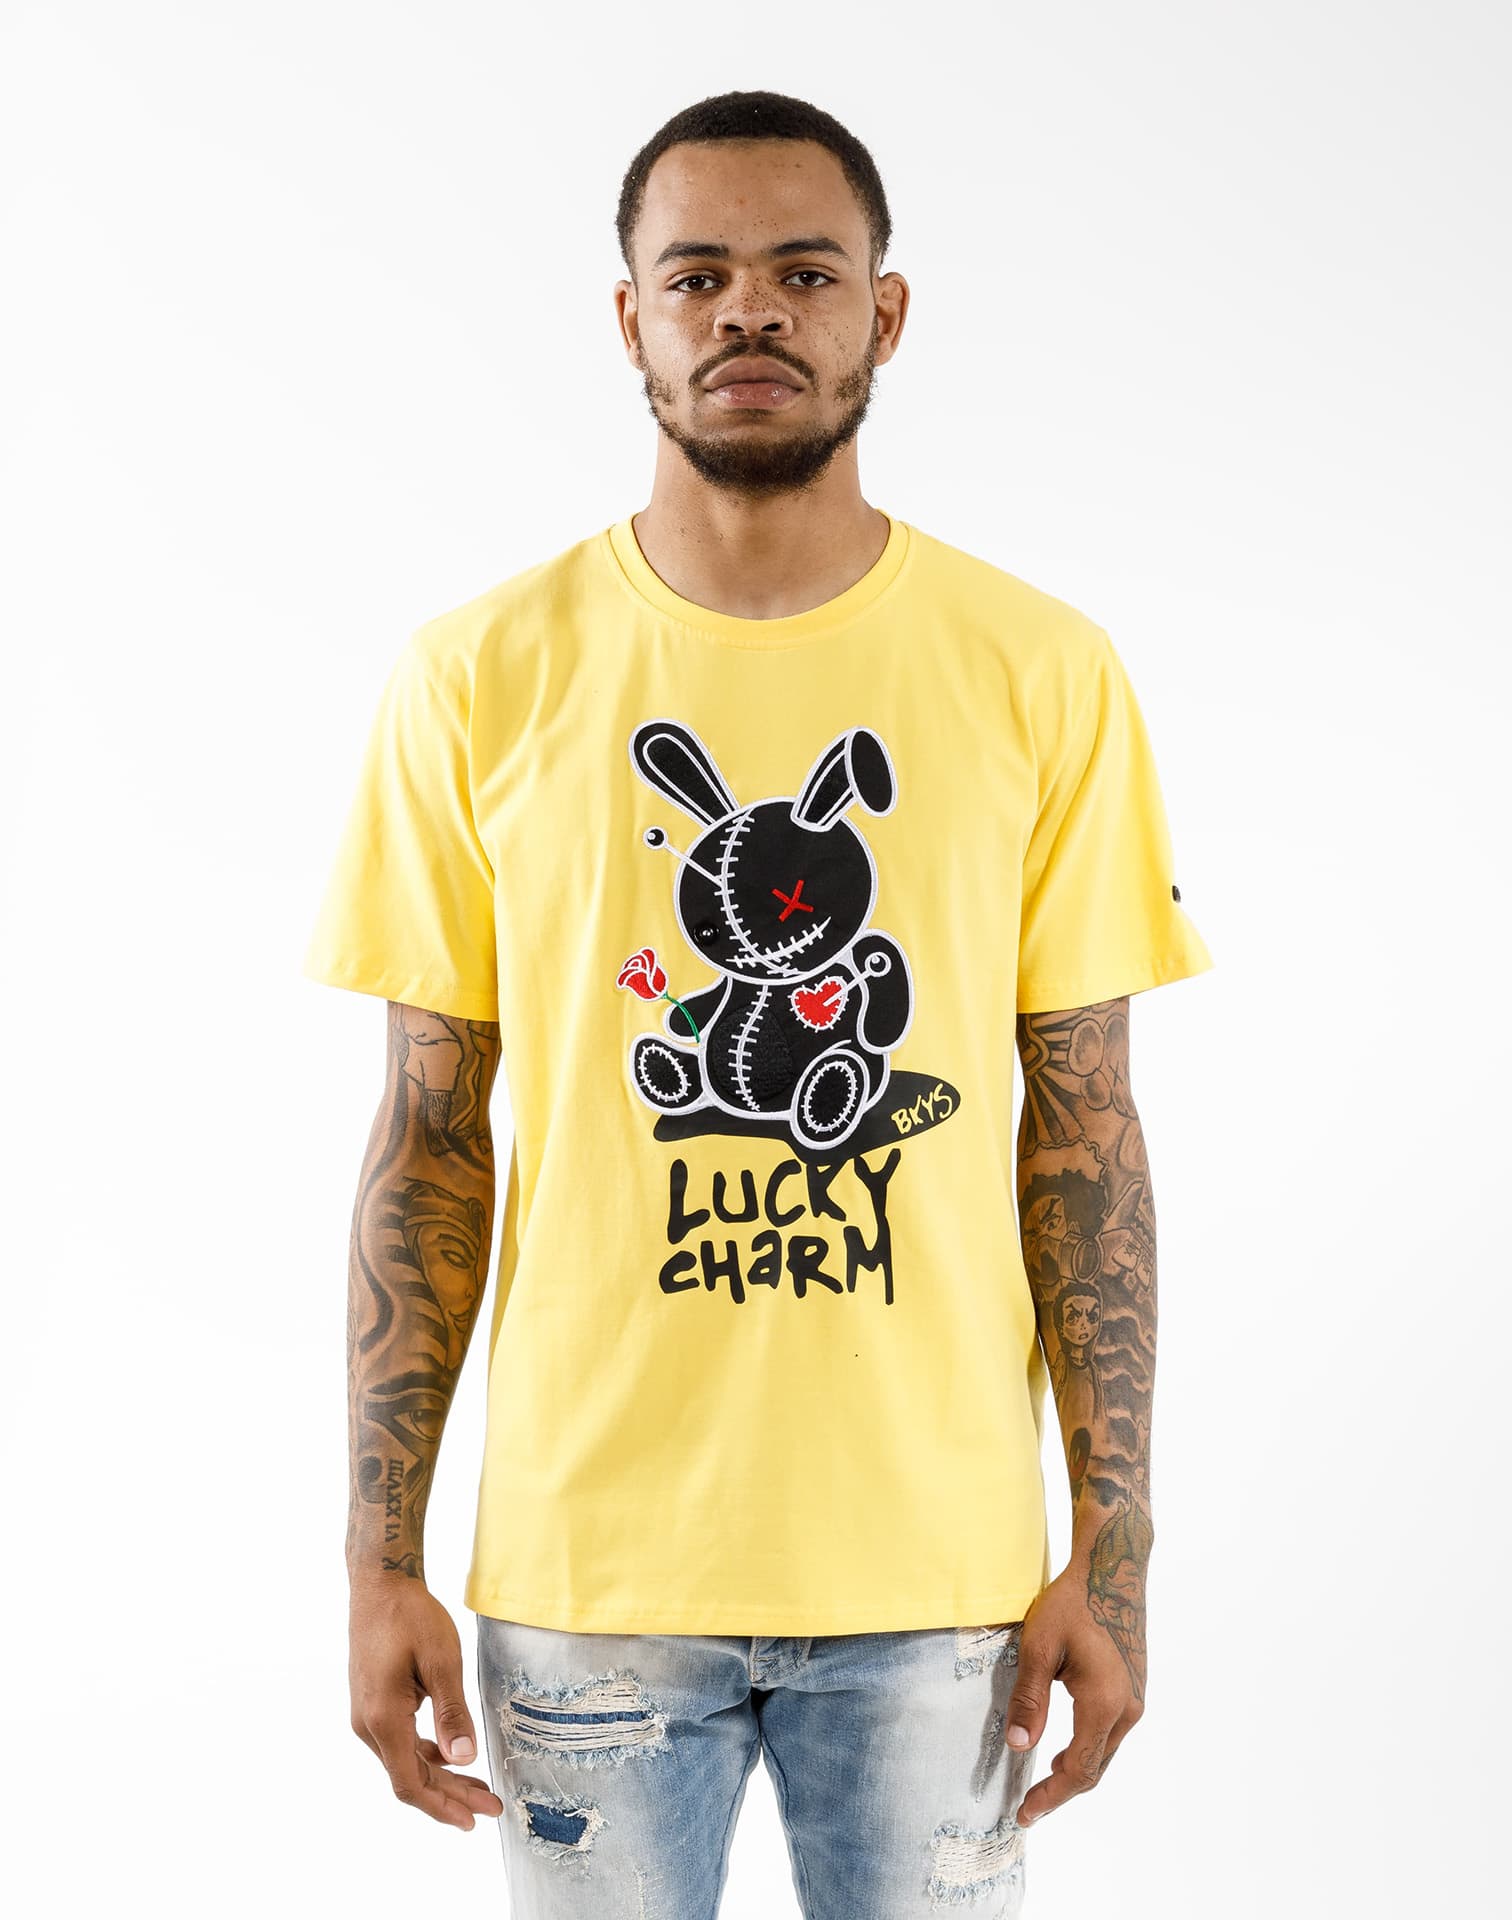 haze Grab complete BKYS Lucky Charm Tee – DTLR